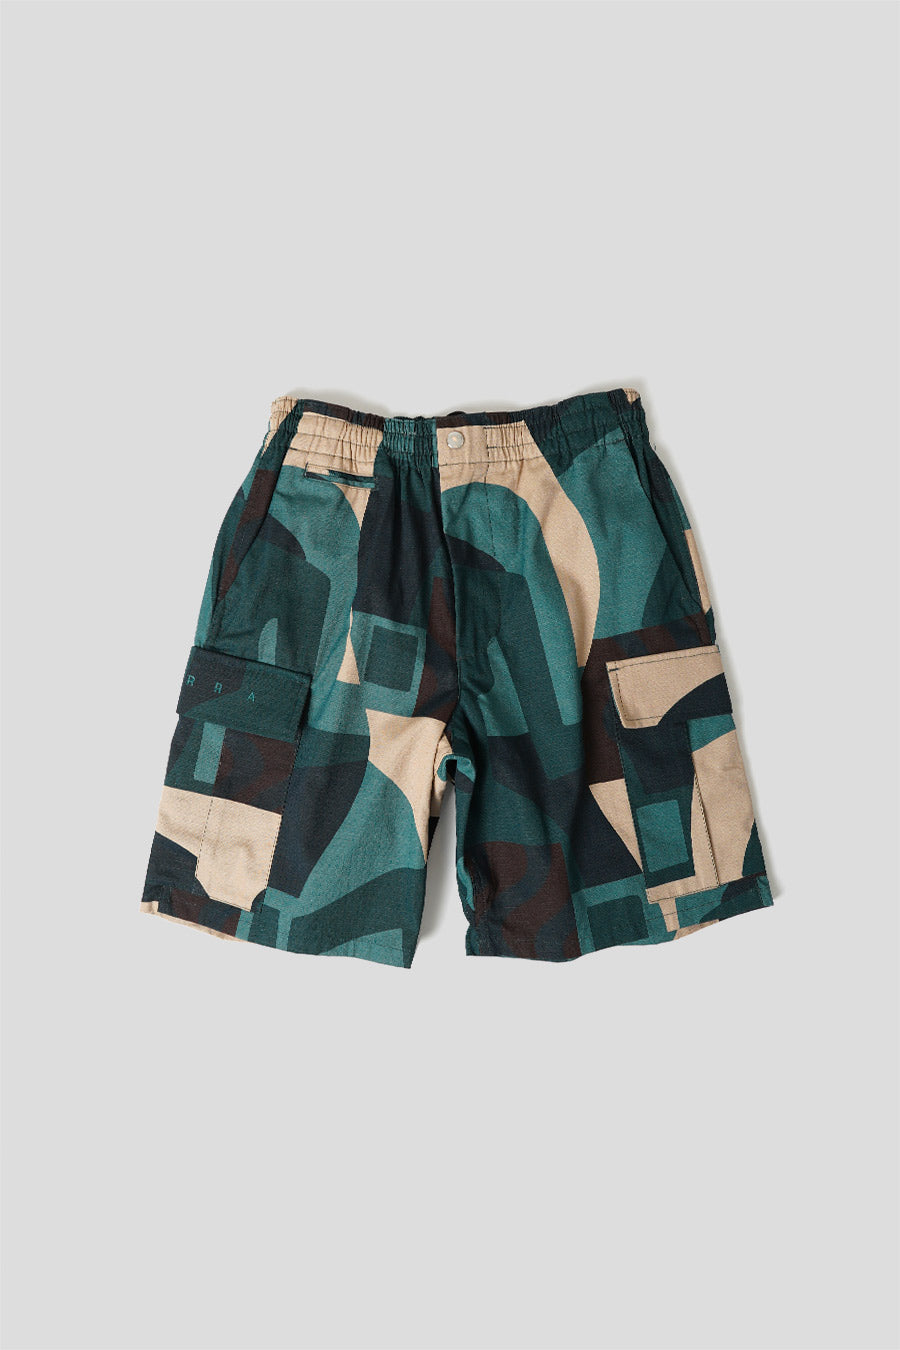 BY PARRA - GREEN DISTORTED CAMO SHORTS - LE LABO STORE